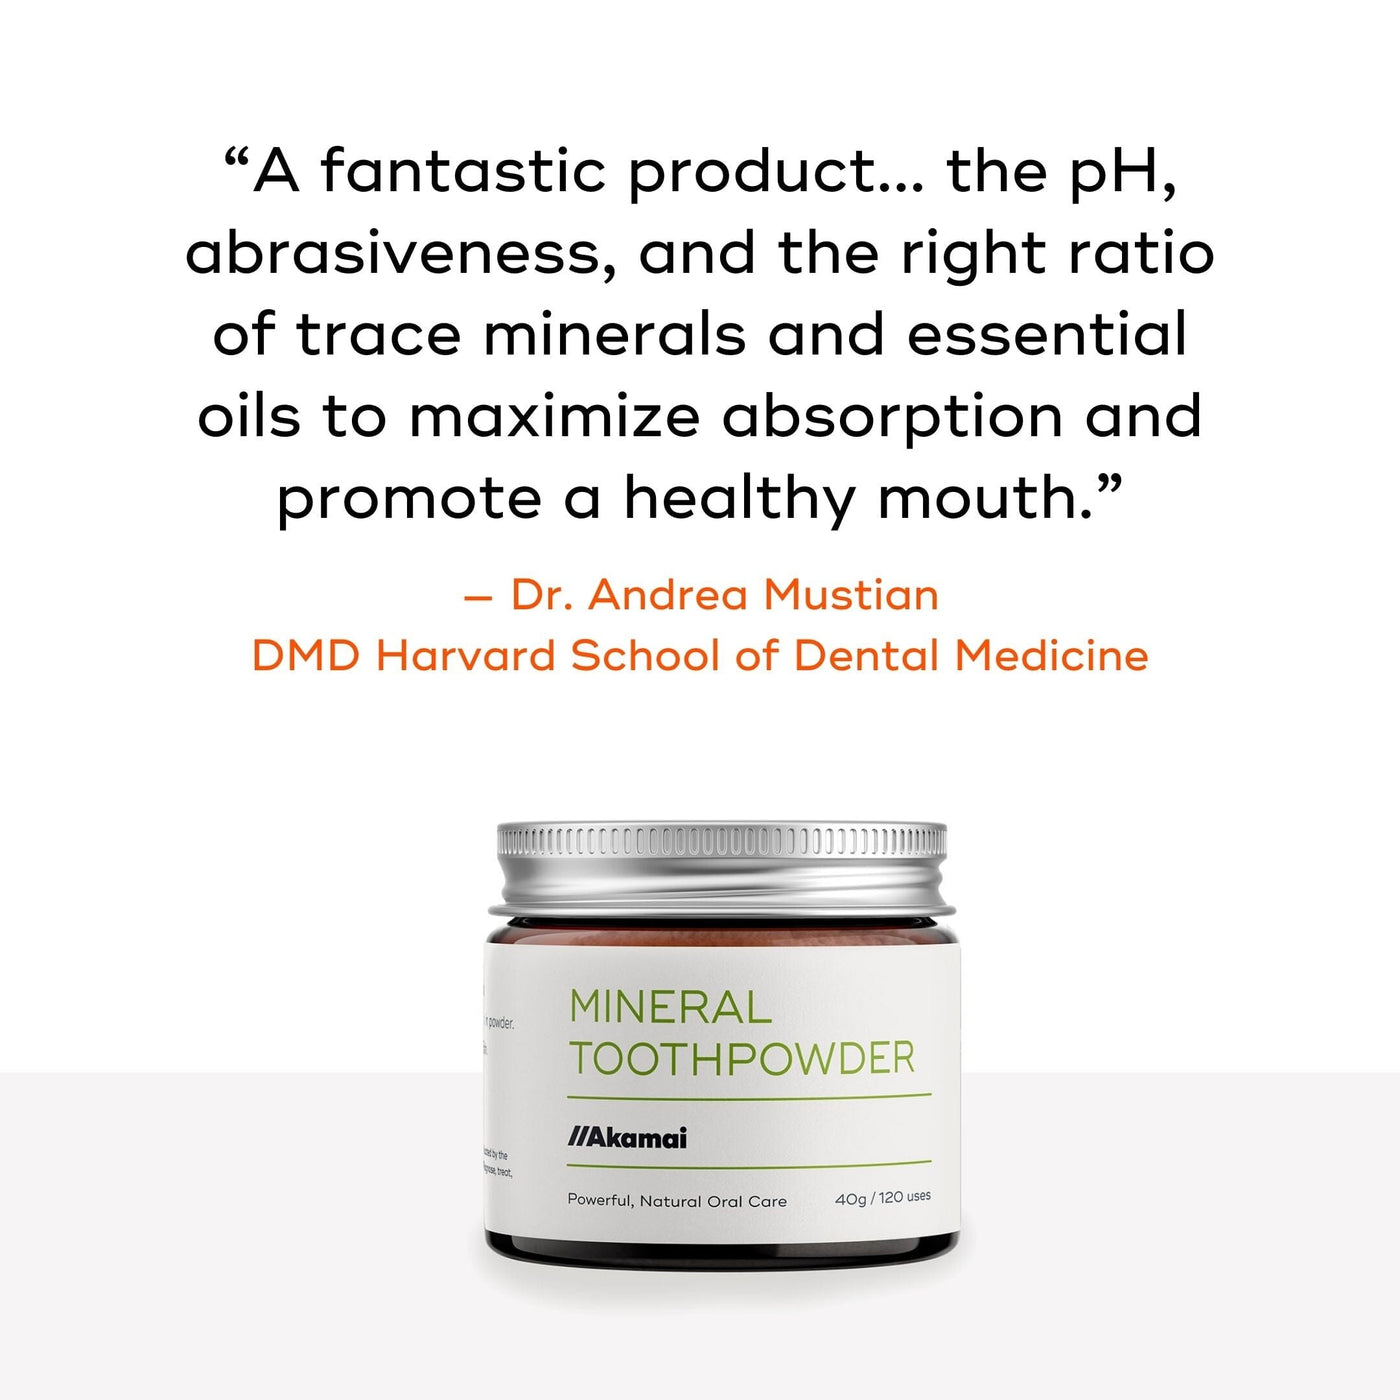 A rave review for Akamai's Mineral Toothpowder: "A fantastic product... the pH, abrasiveness, and the right ratio of trace minerals and essential oils to maximize absorption and promote a healthy mouth. 